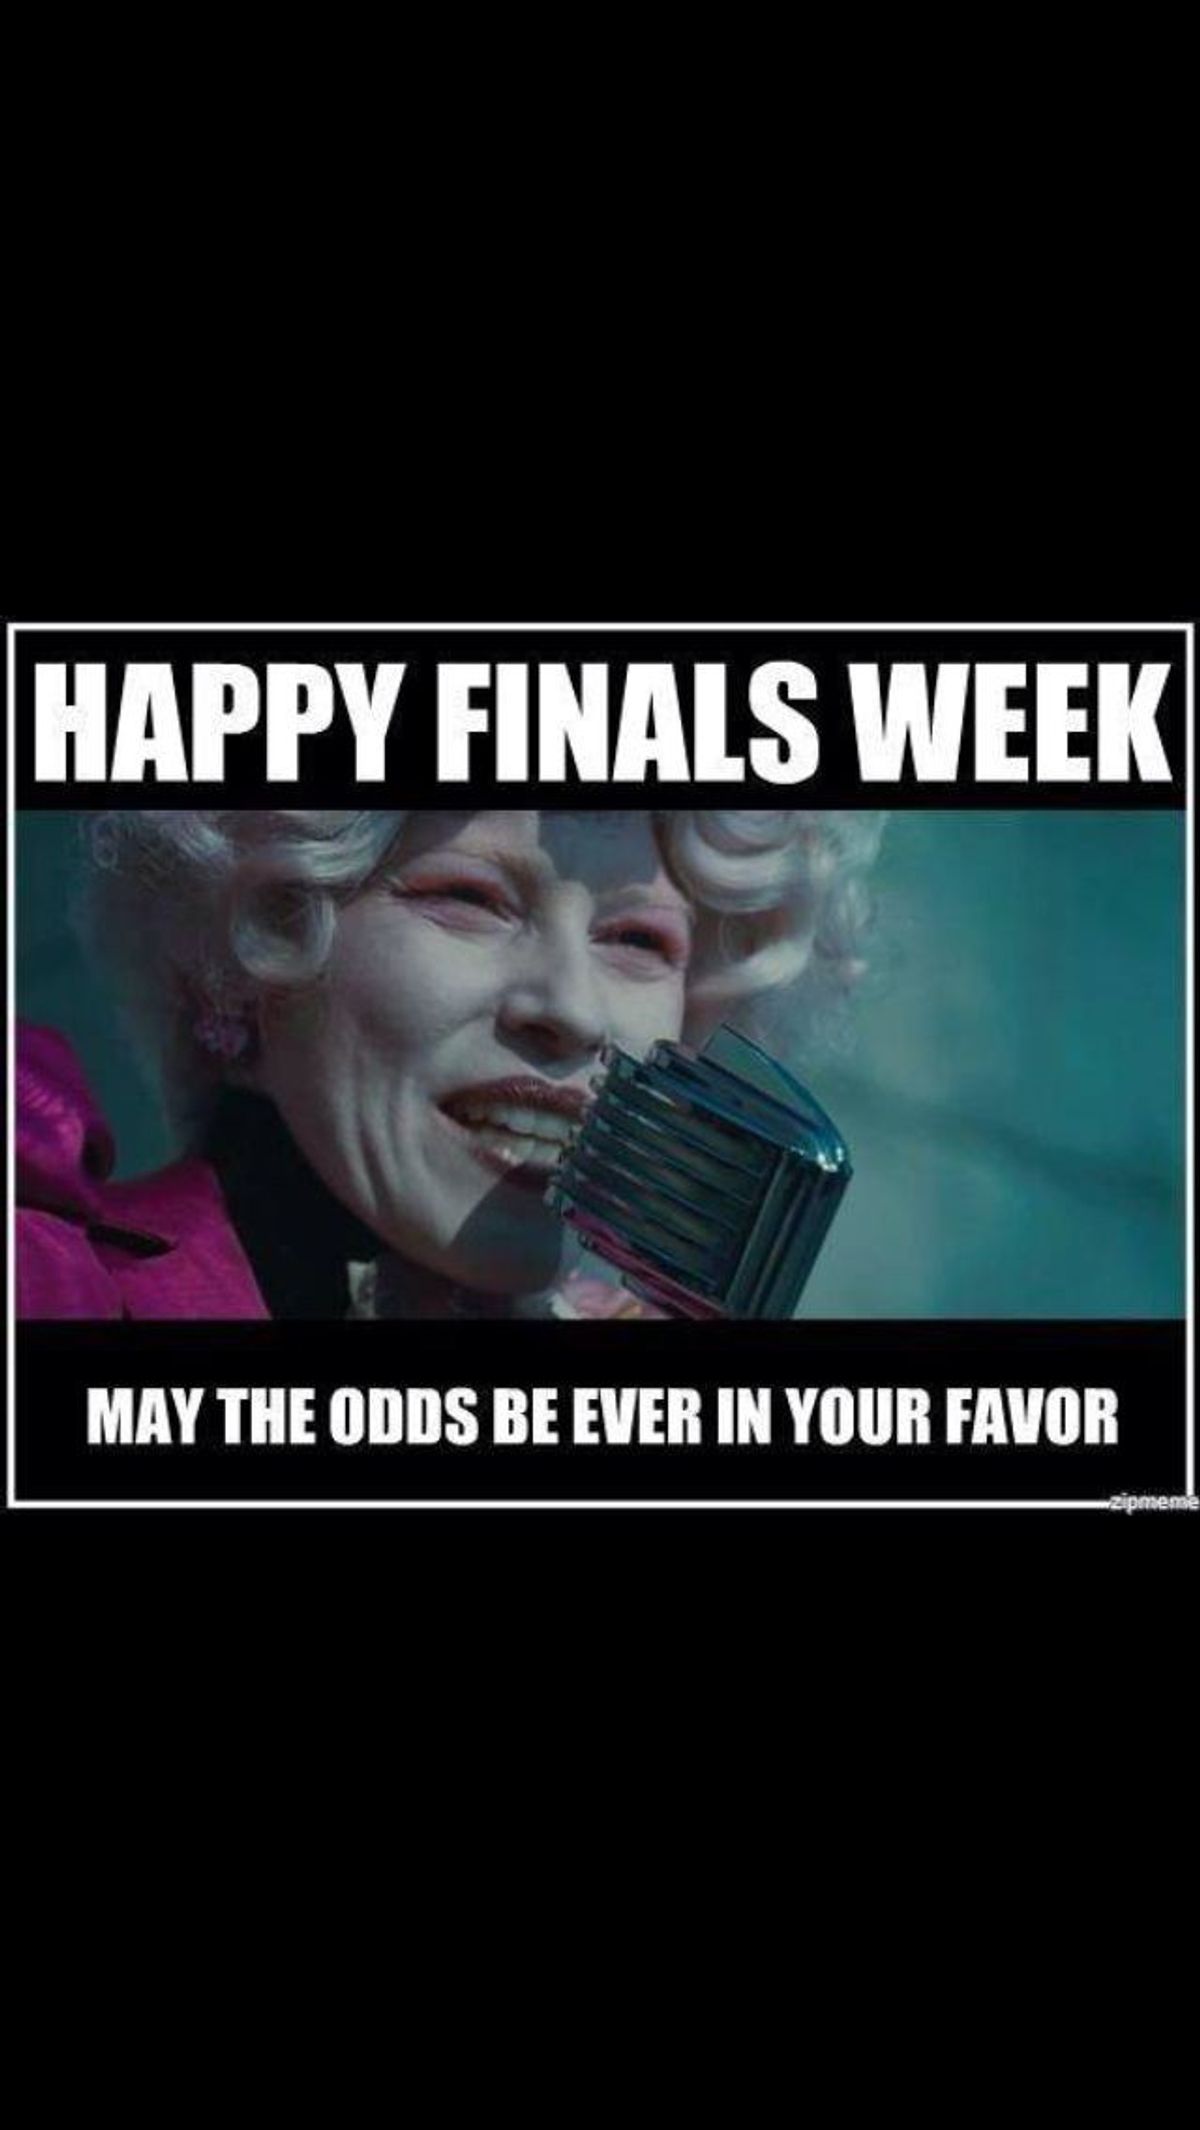 22 Ways To Make Sure You Kill Your Finals